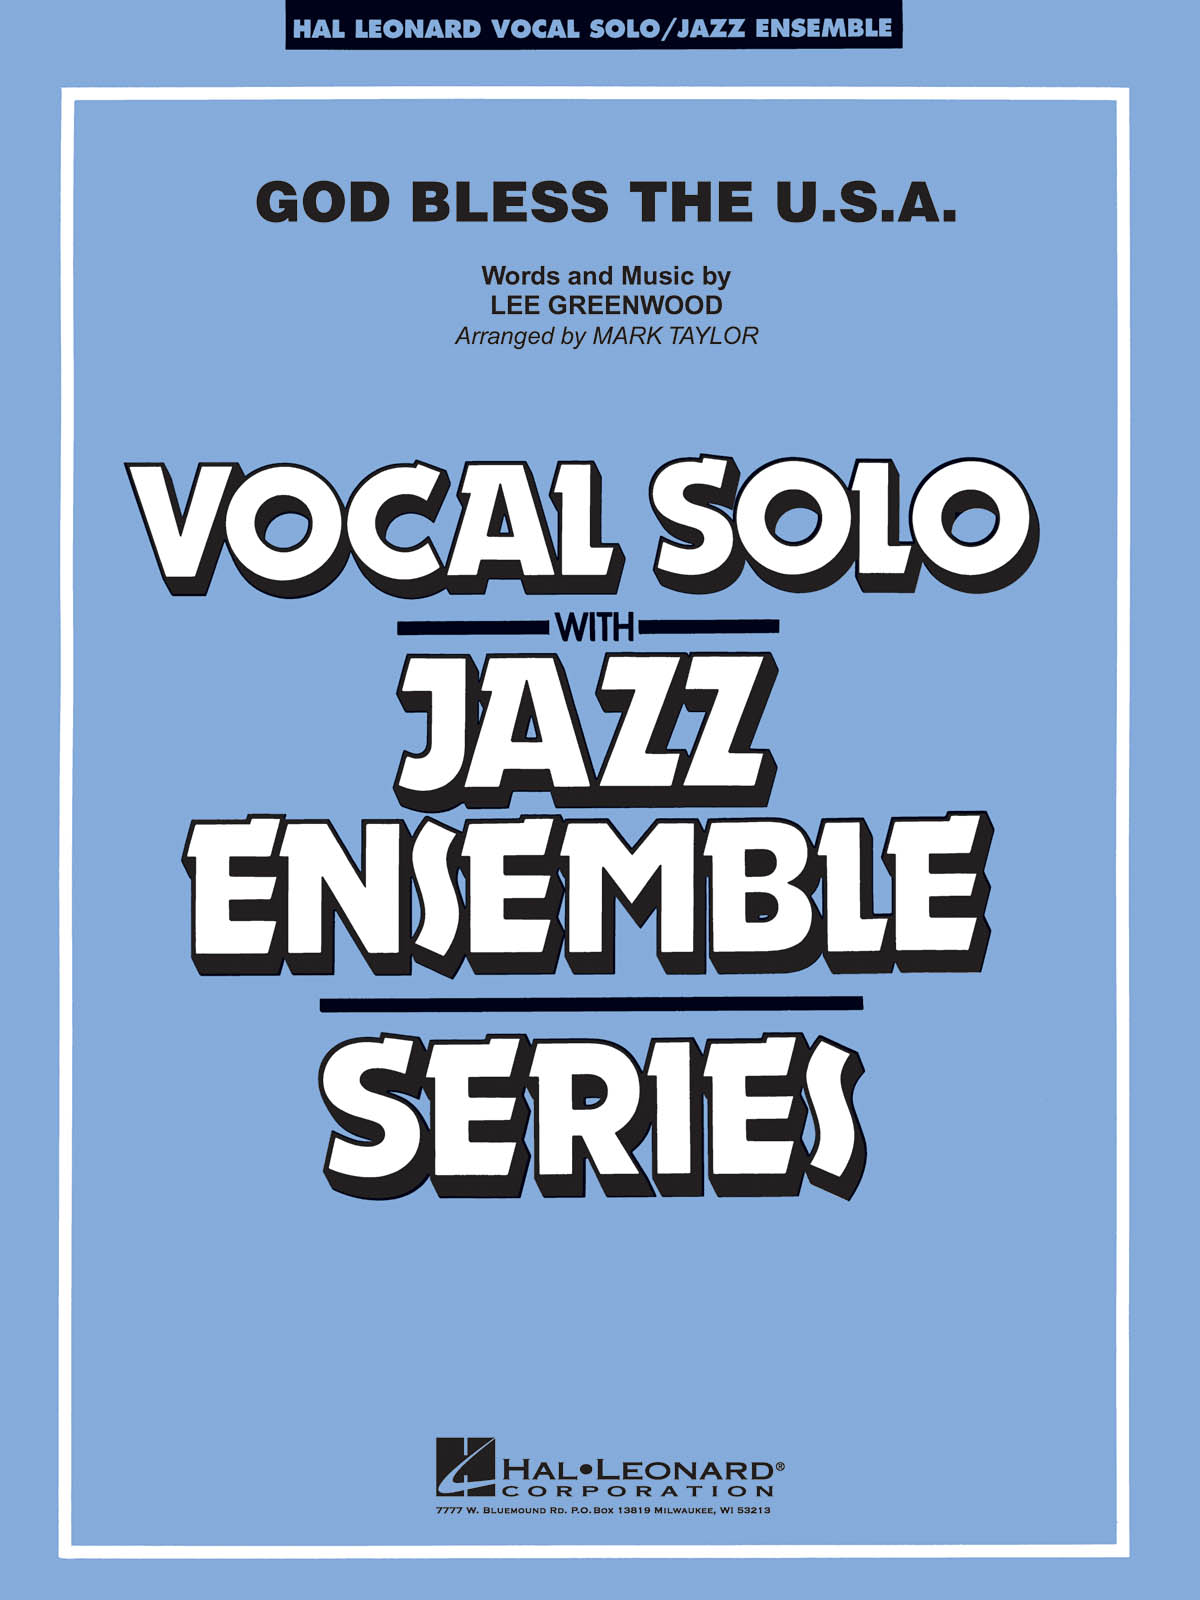 Lee Greenwood: God Bless the U.S.A.: Jazz Ensemble and Vocal: Score